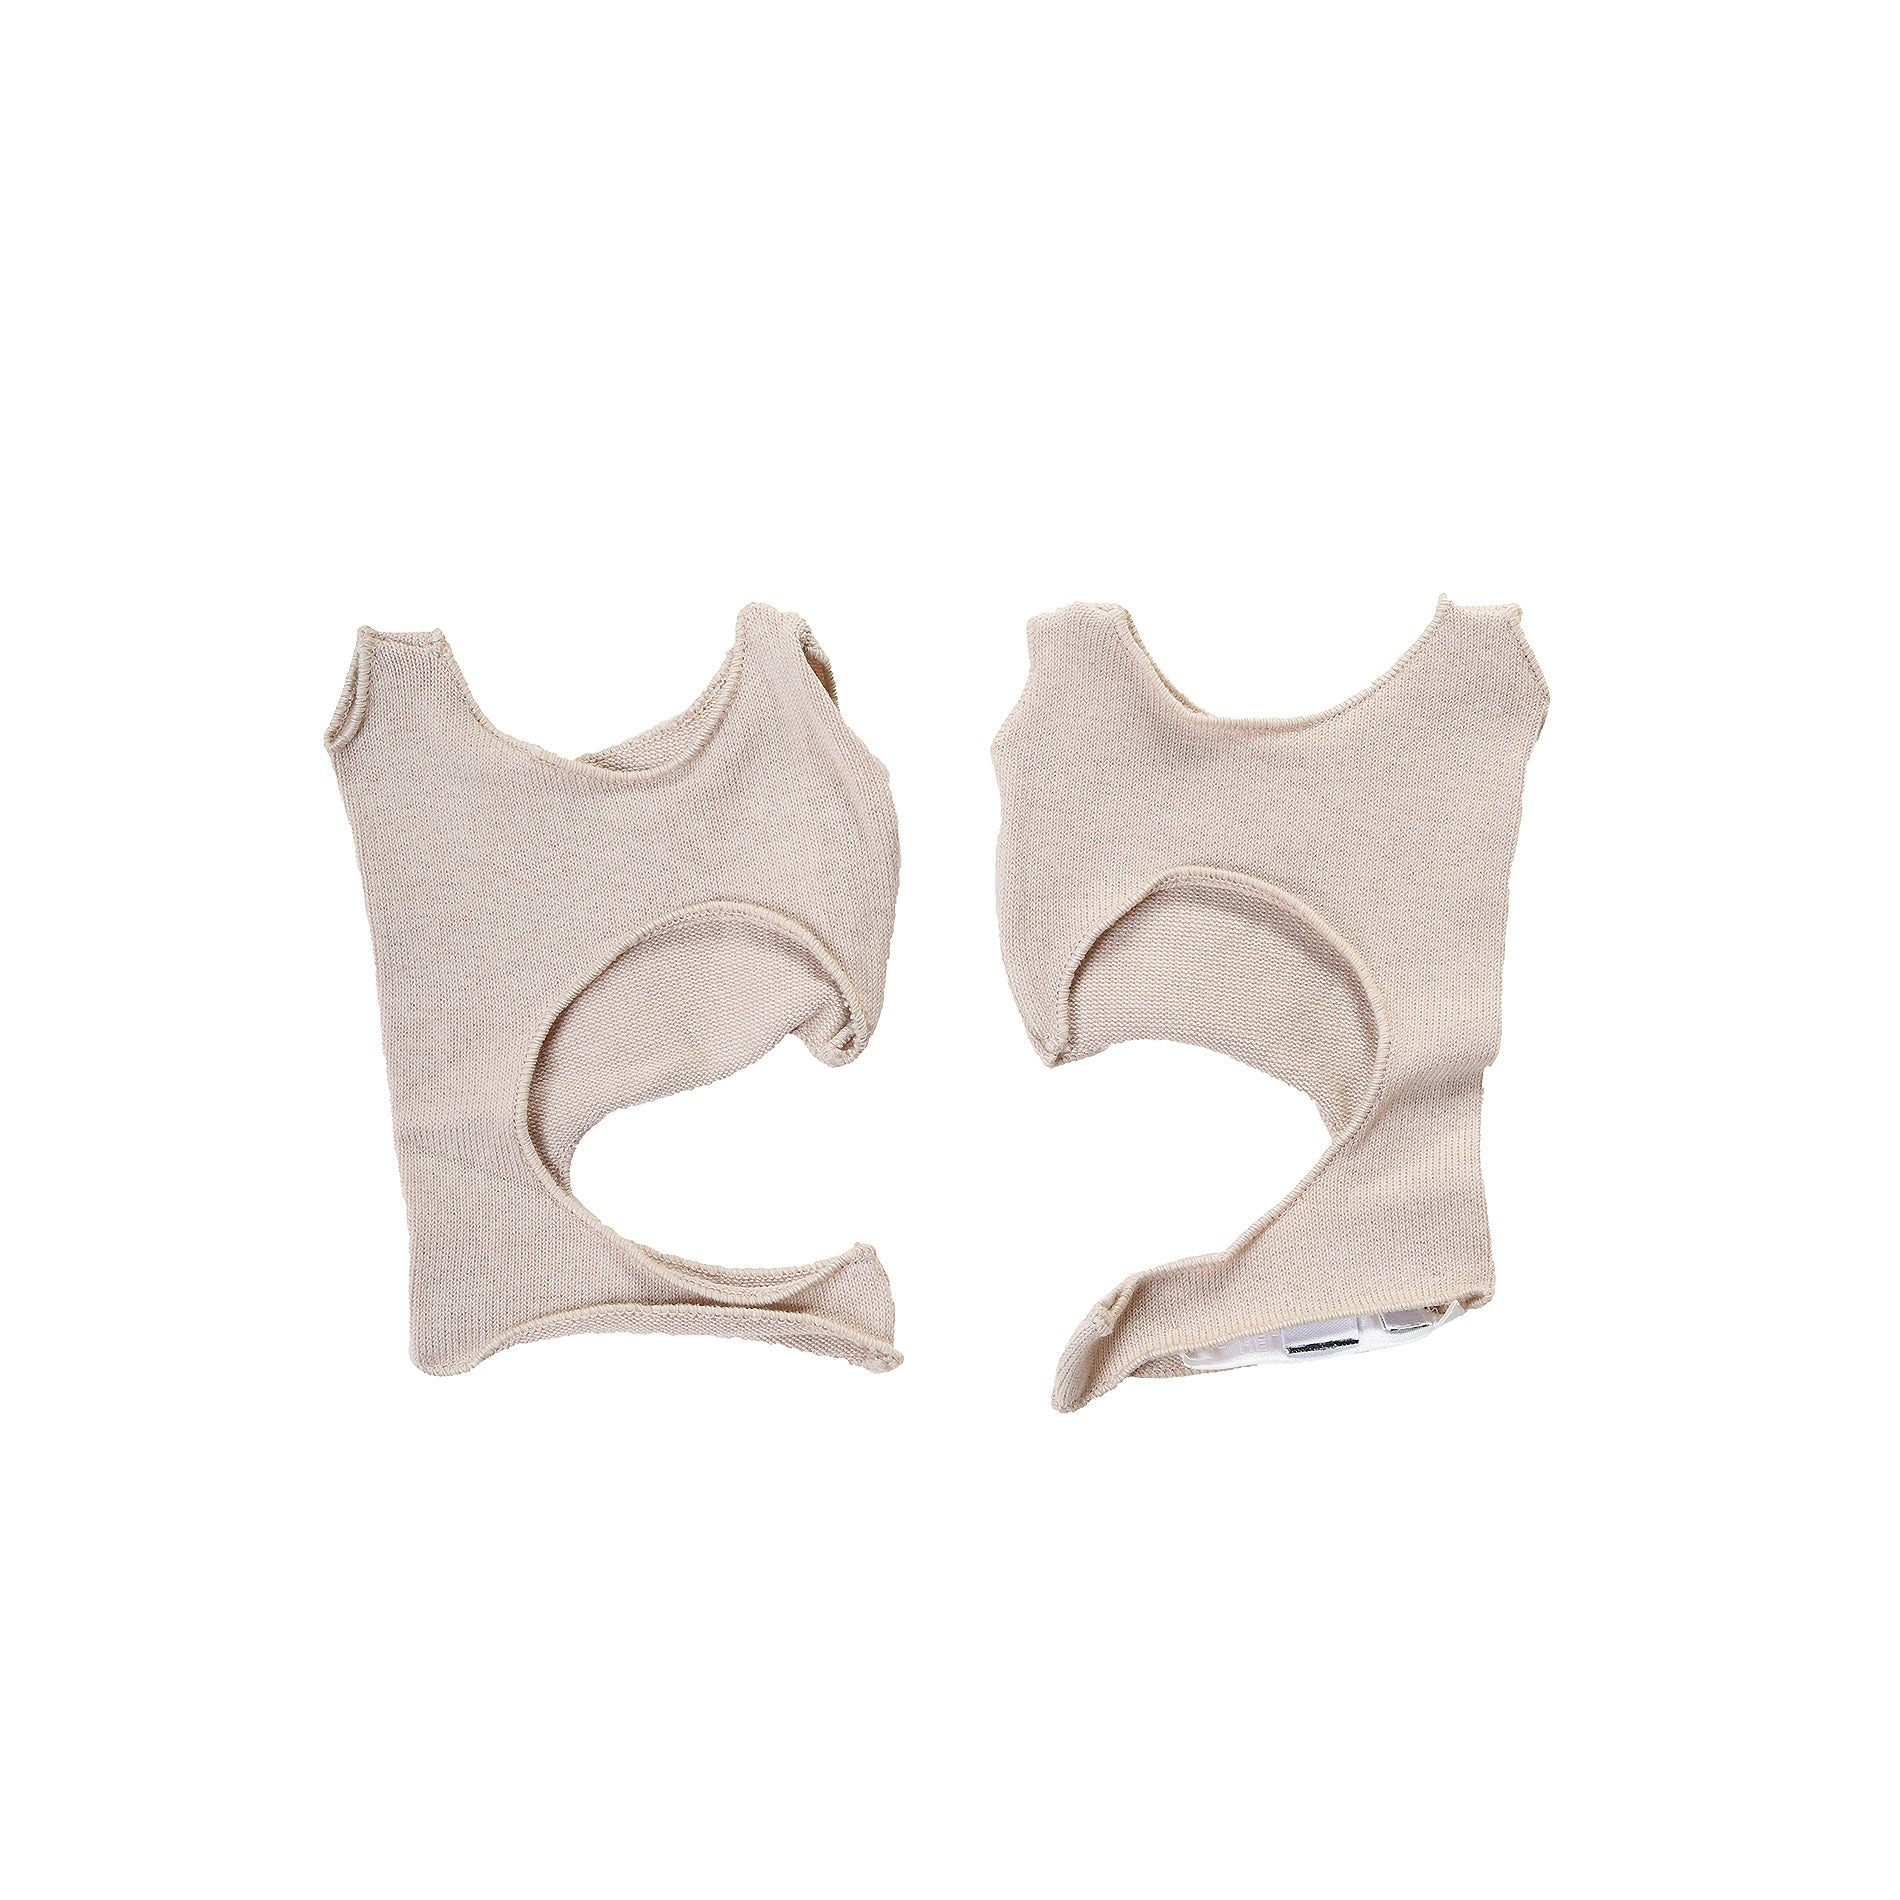 Helmut Lang SS04 Nude Cut Out Gloves